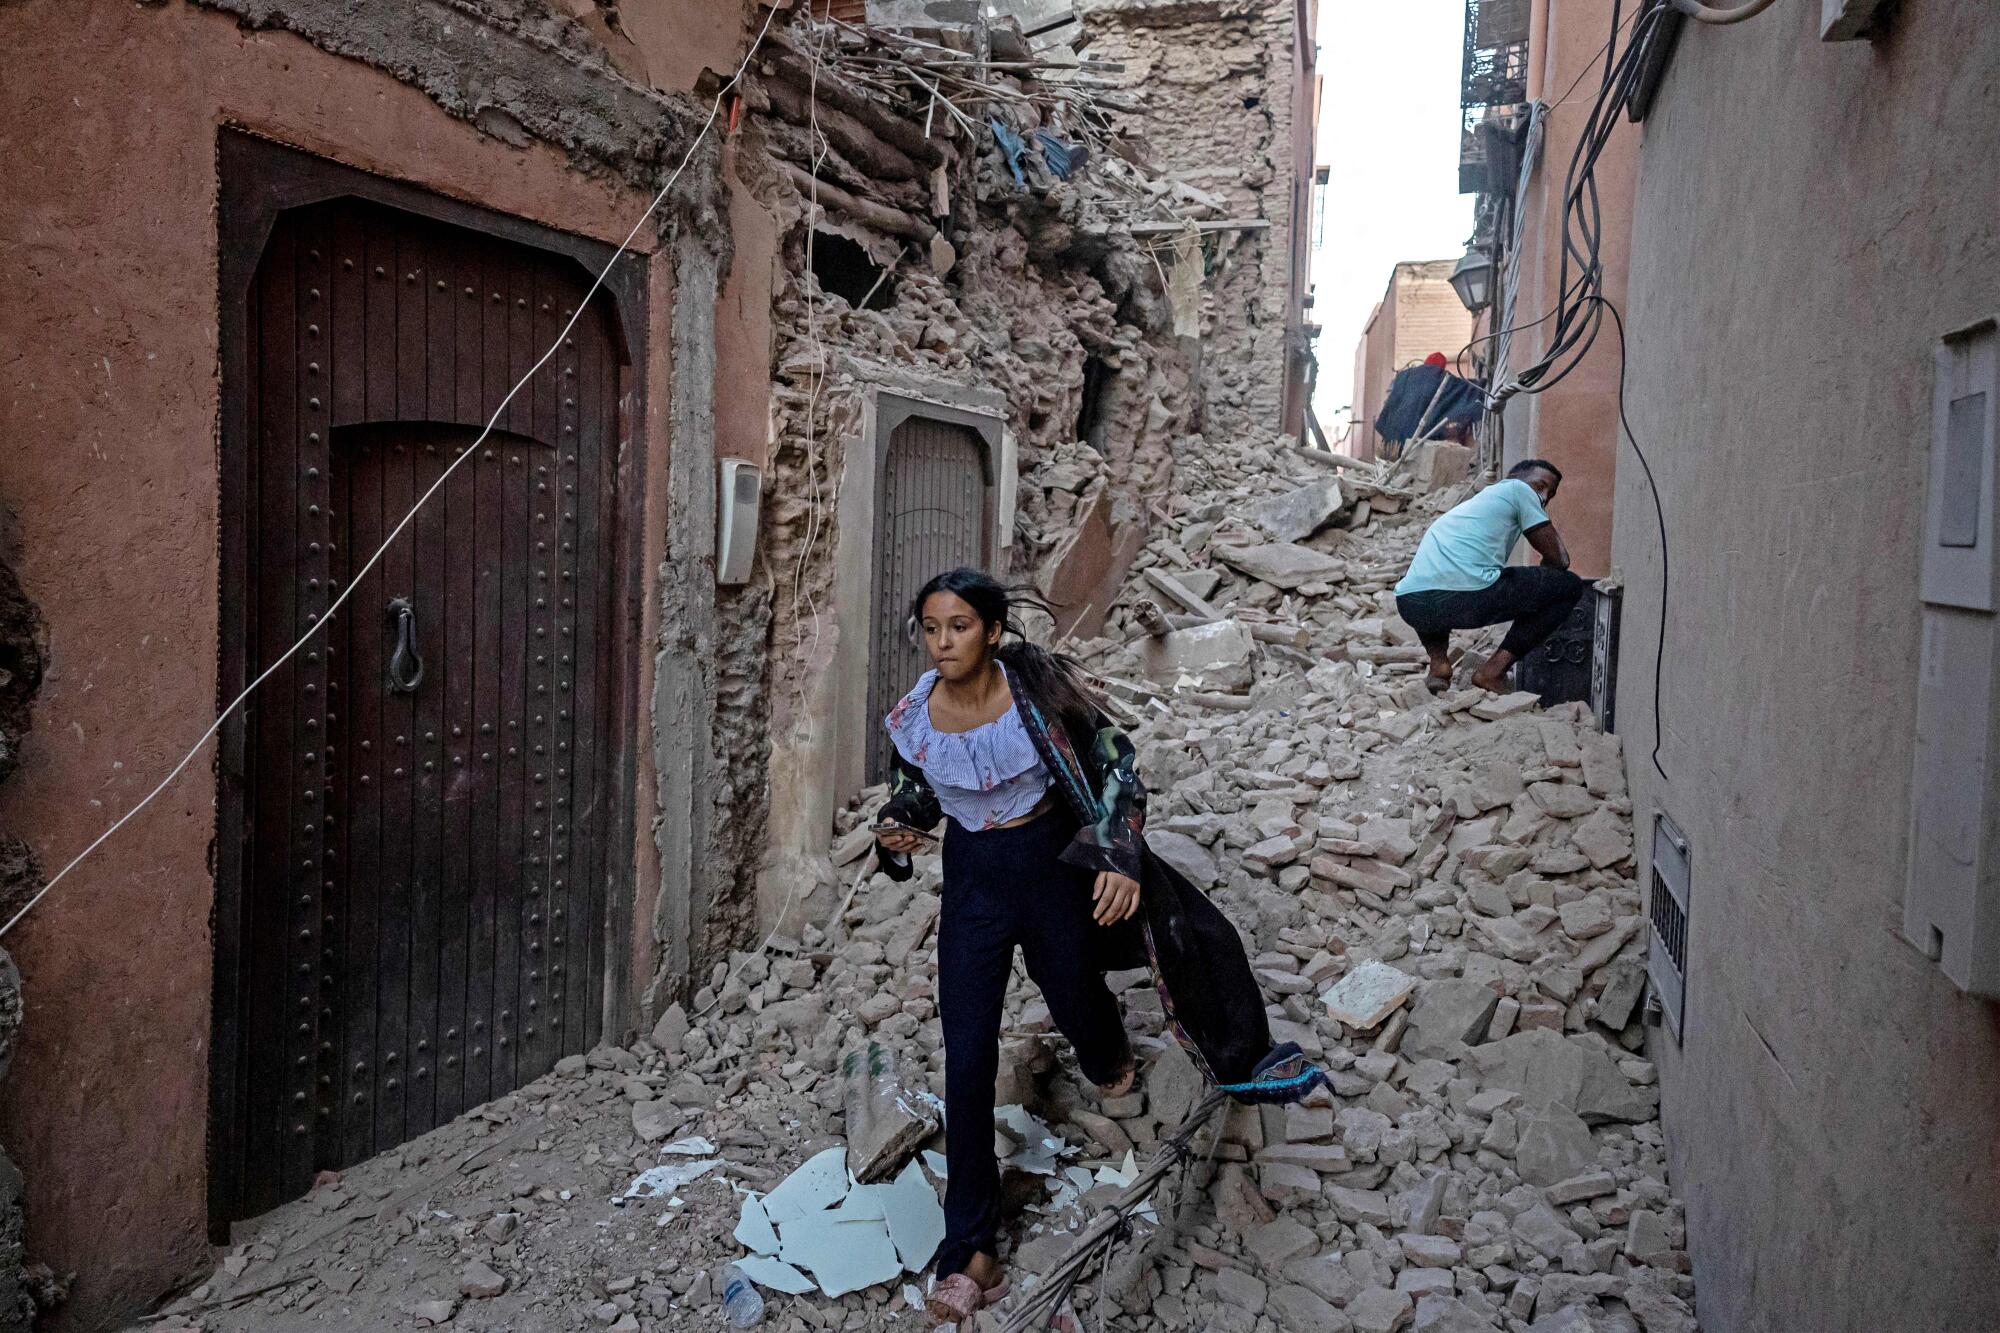 A woman evacuates with her belongings through the rubble in the earthquake